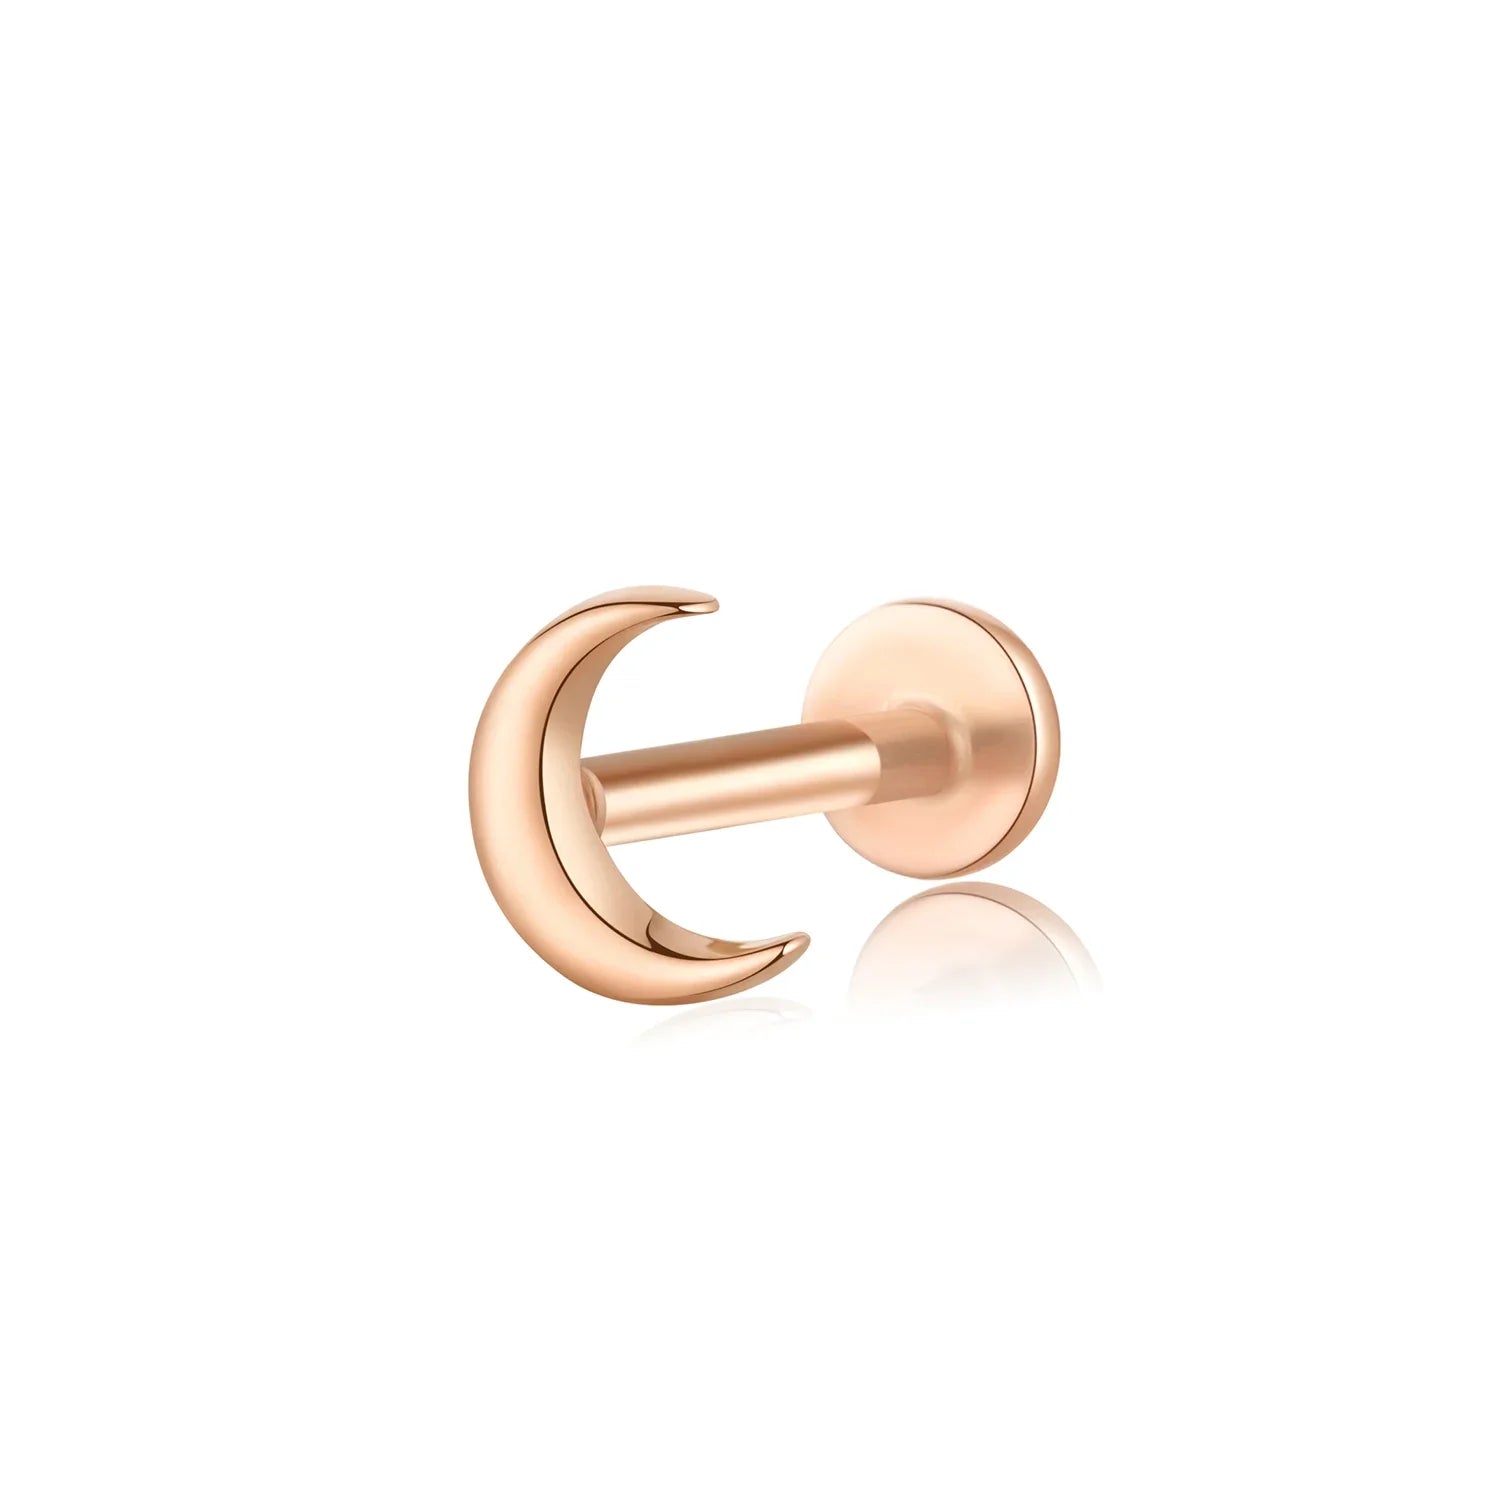 Rose gold nose stud with the moon 14K solid gold threadless ear stud lip stud Ashley Piercing Jewelry